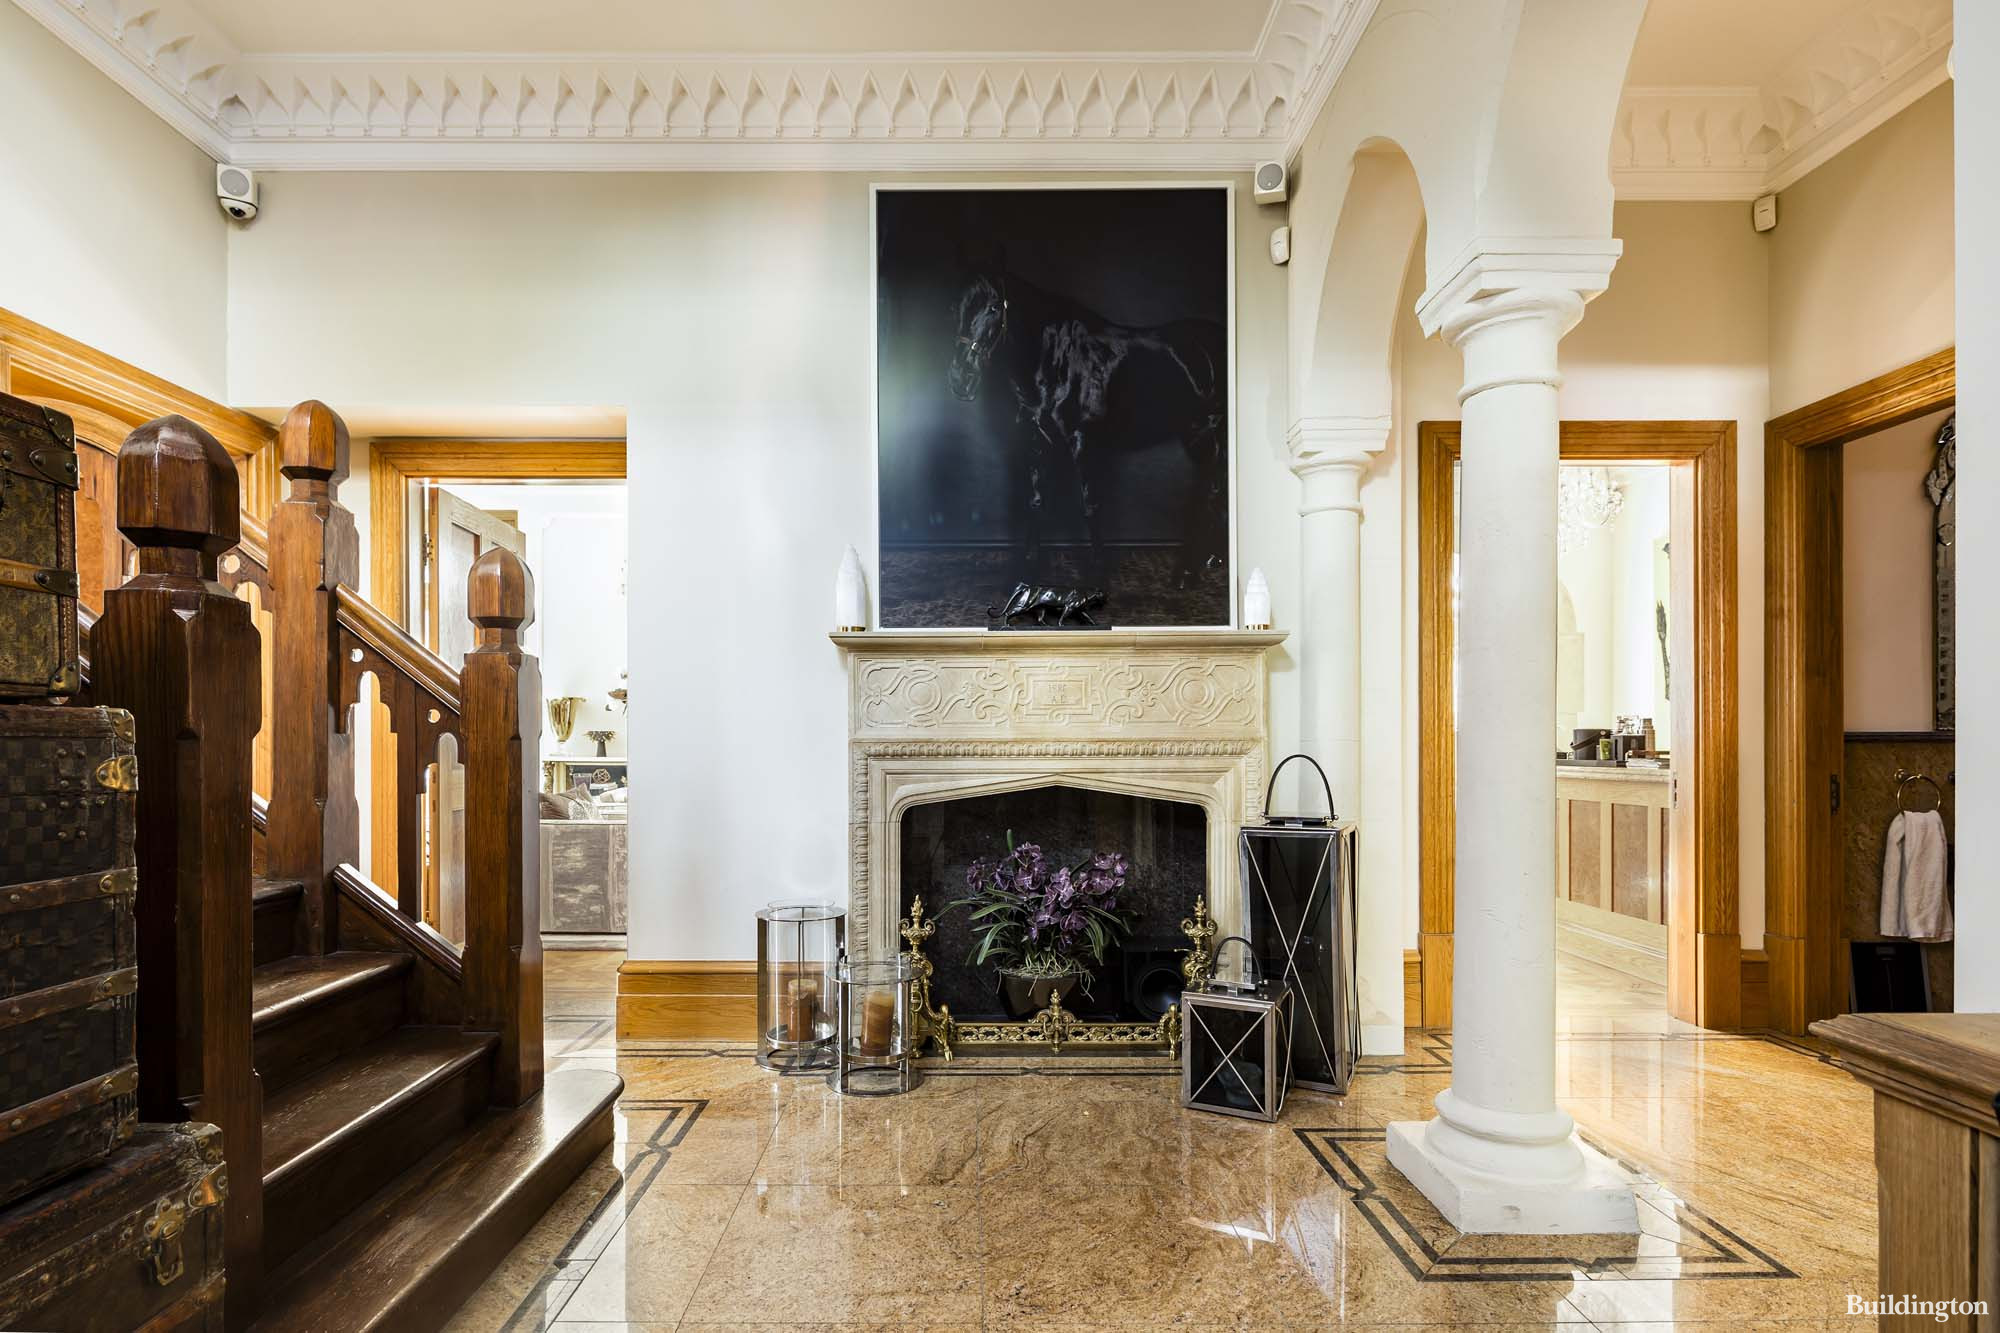 Ground-floor entrance hall in The Vicarage features an original limestone fireplace bearing the date AD1886 and granite flooring, off the hall is the Gothic style staircase leading to the upper floors, with original stained glass windows on the landings cascading the stairwell and hall